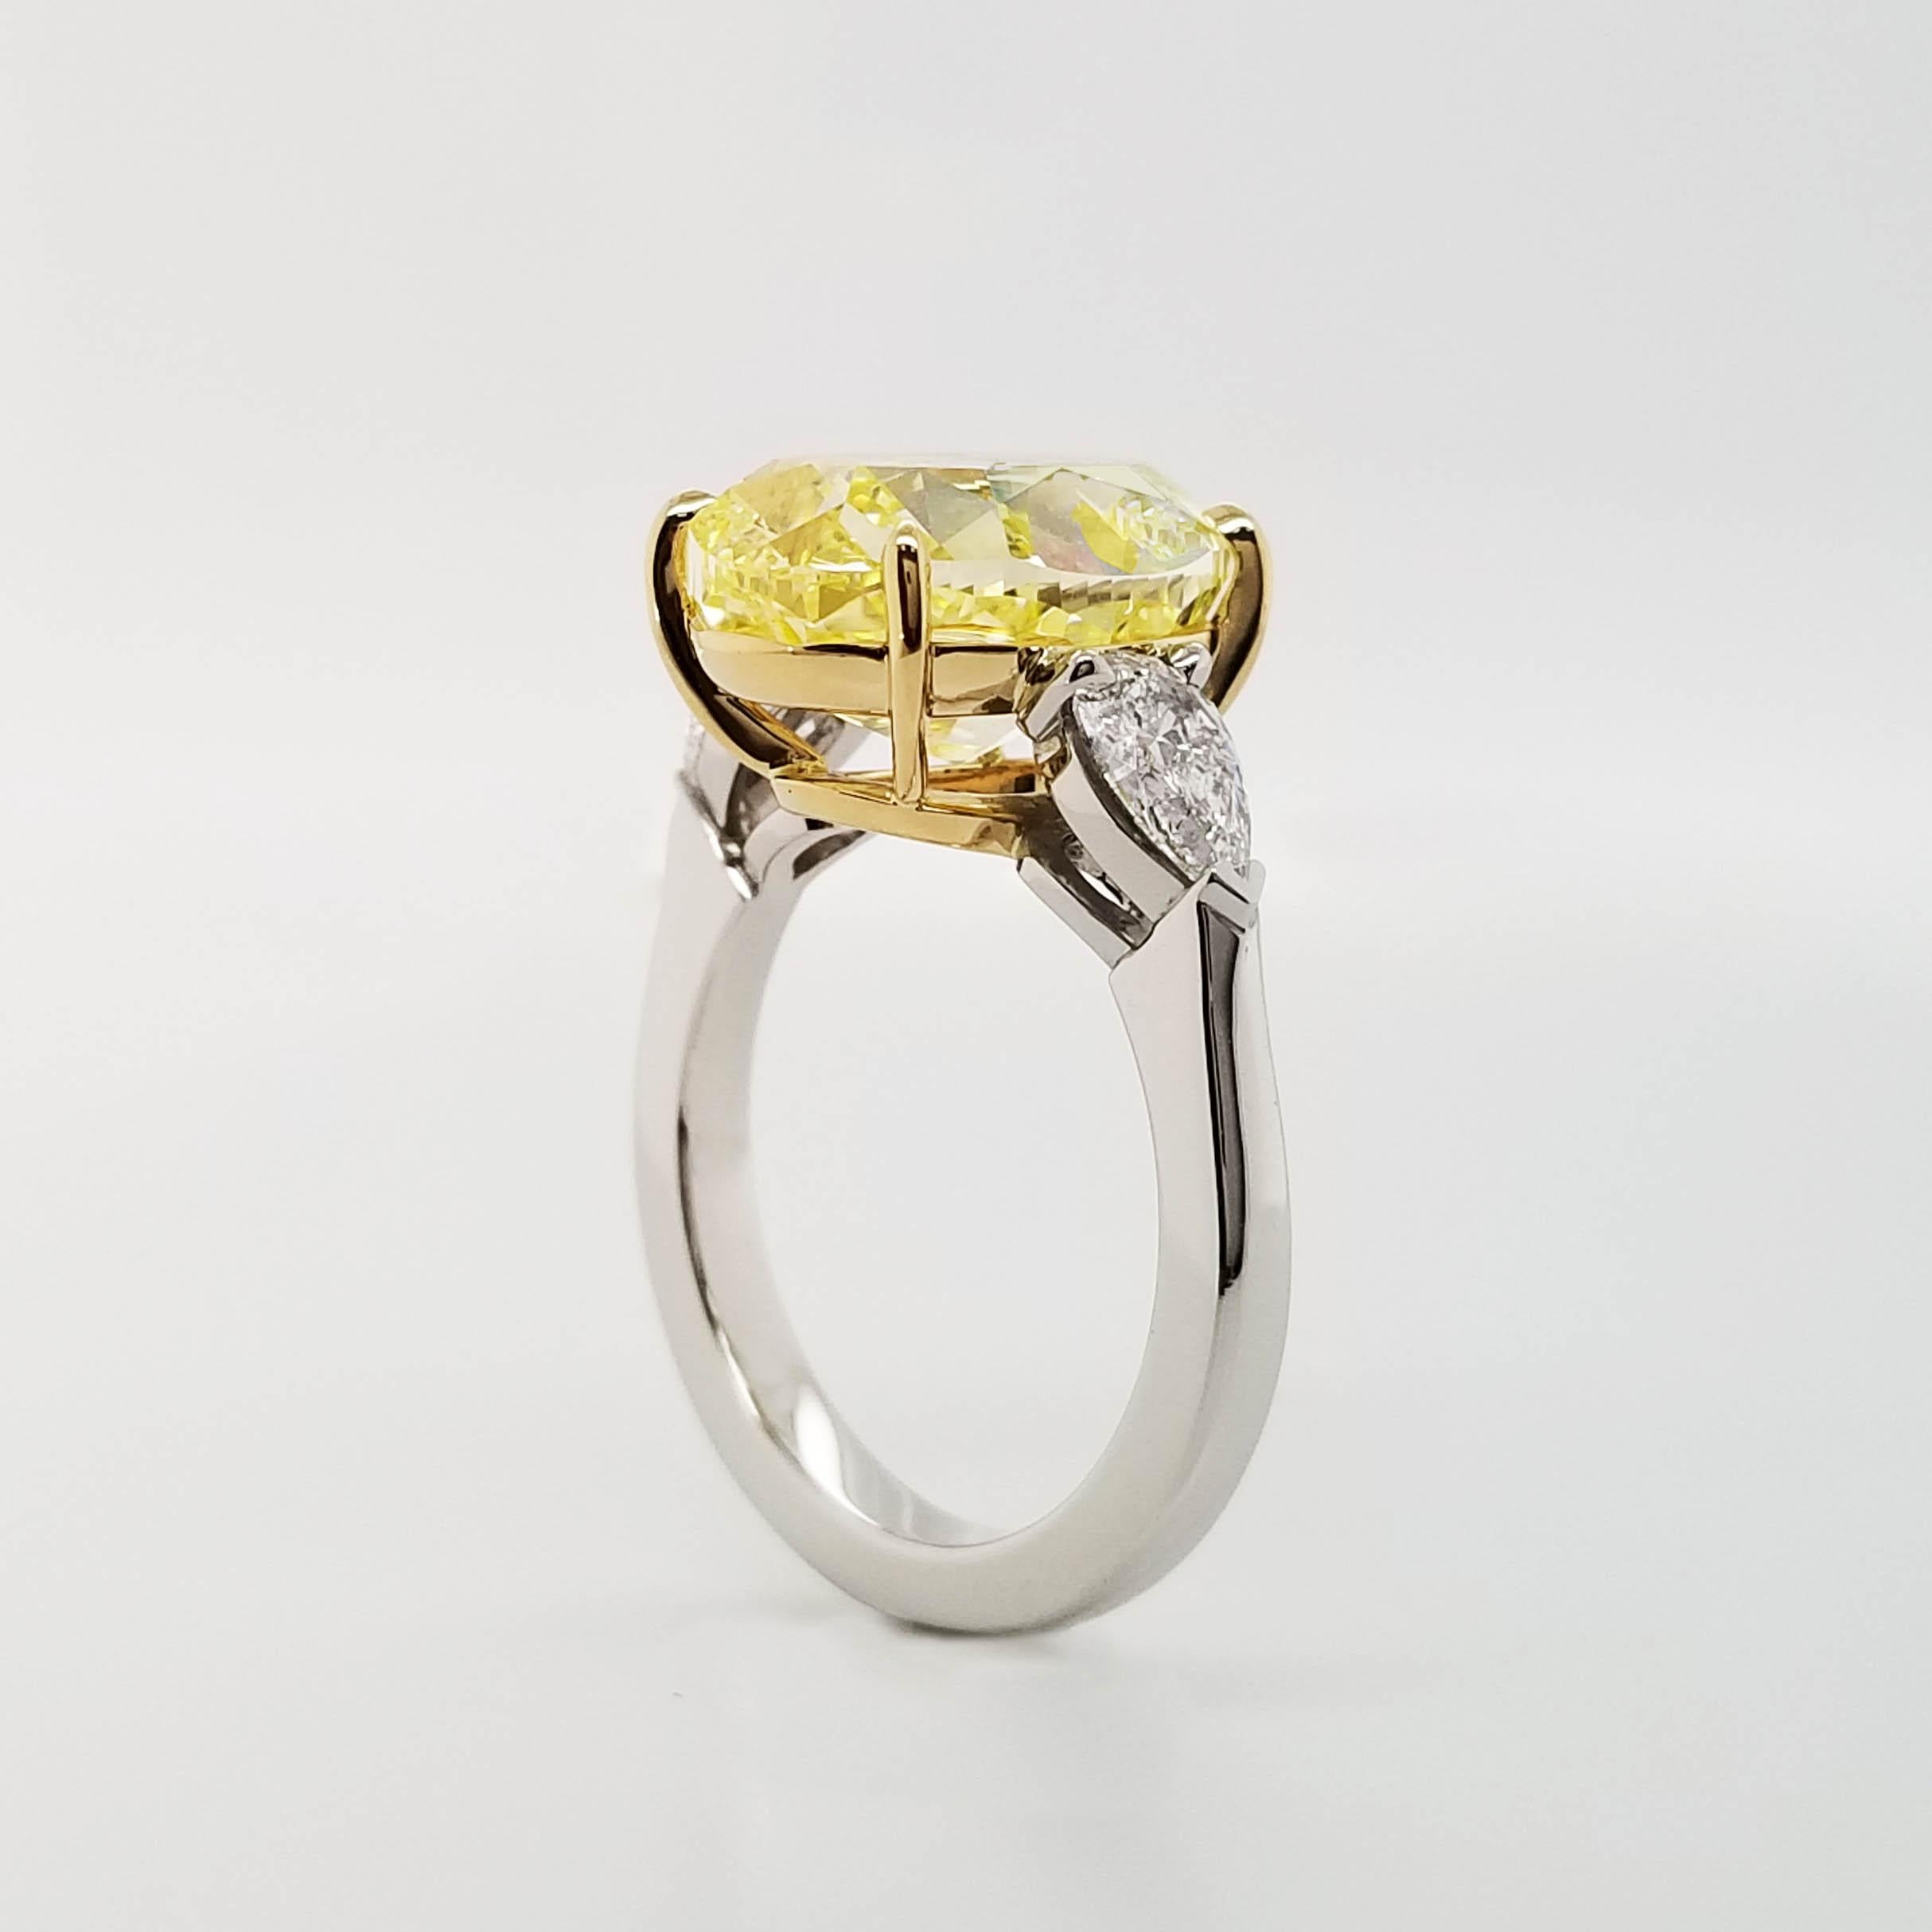 Oval Cut Scarselli 8 Carat Fancy Intense Yellow Diamond GIA in a Platinum Engagement Ring